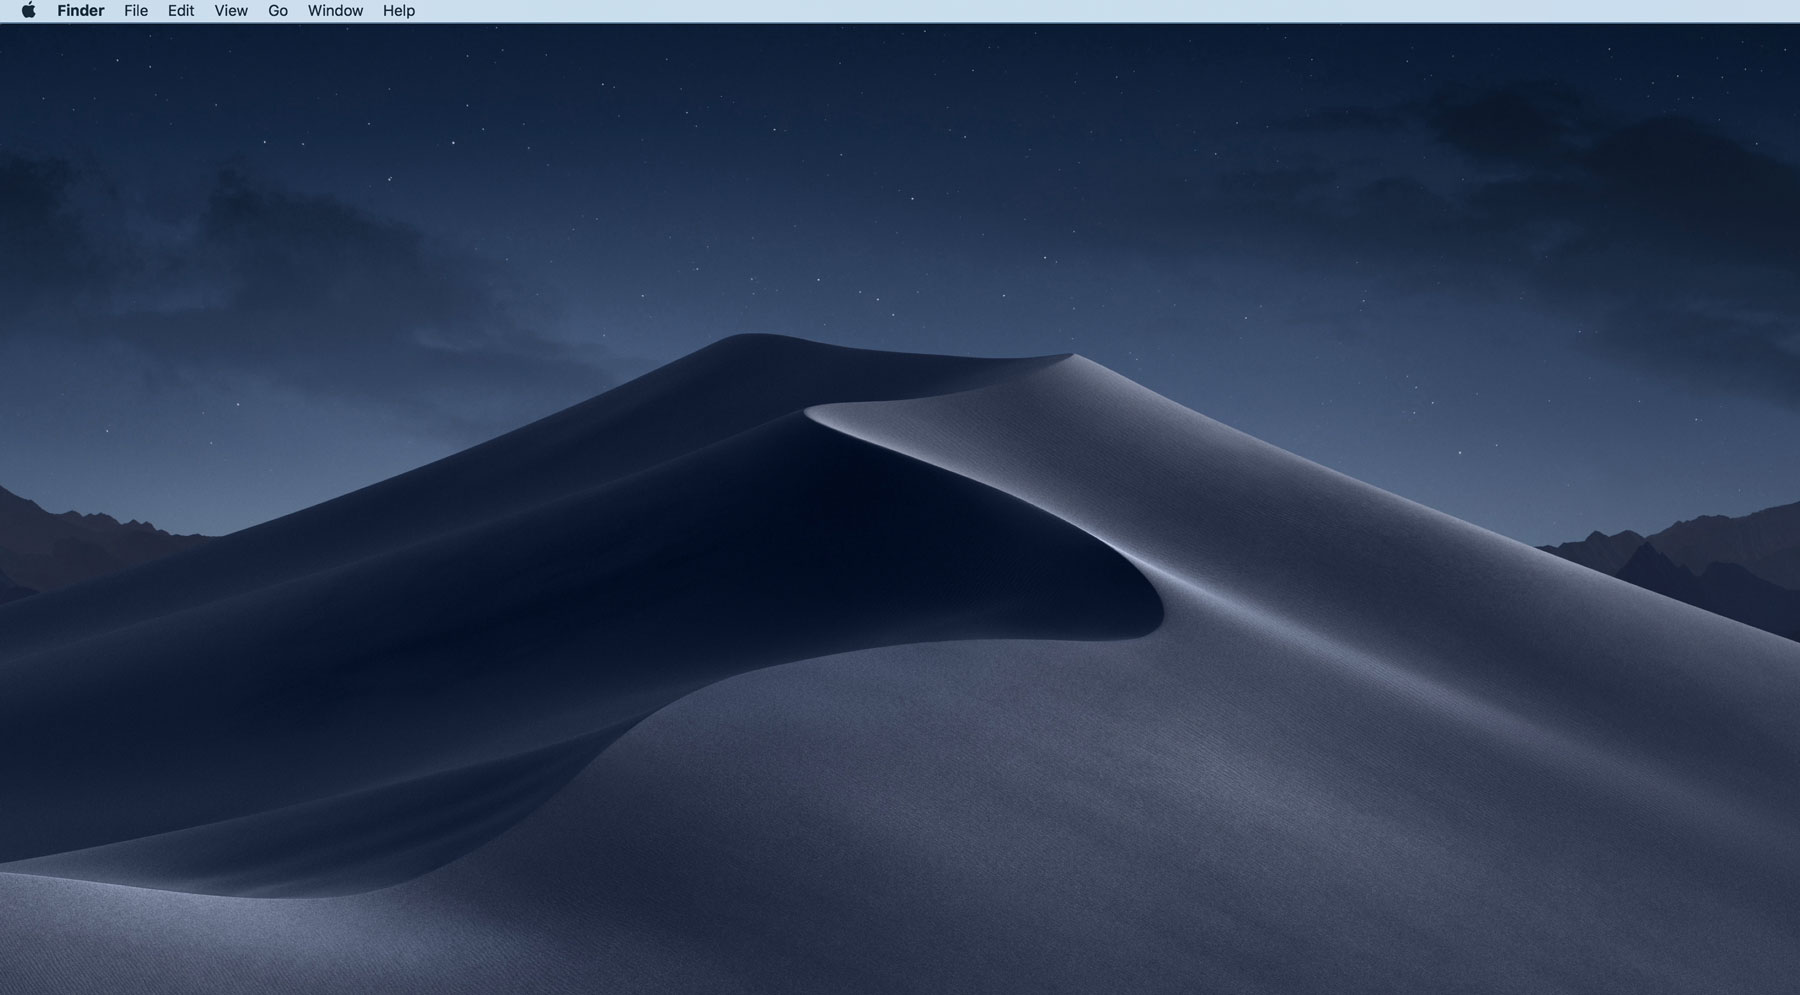 macos mojave icon pack download